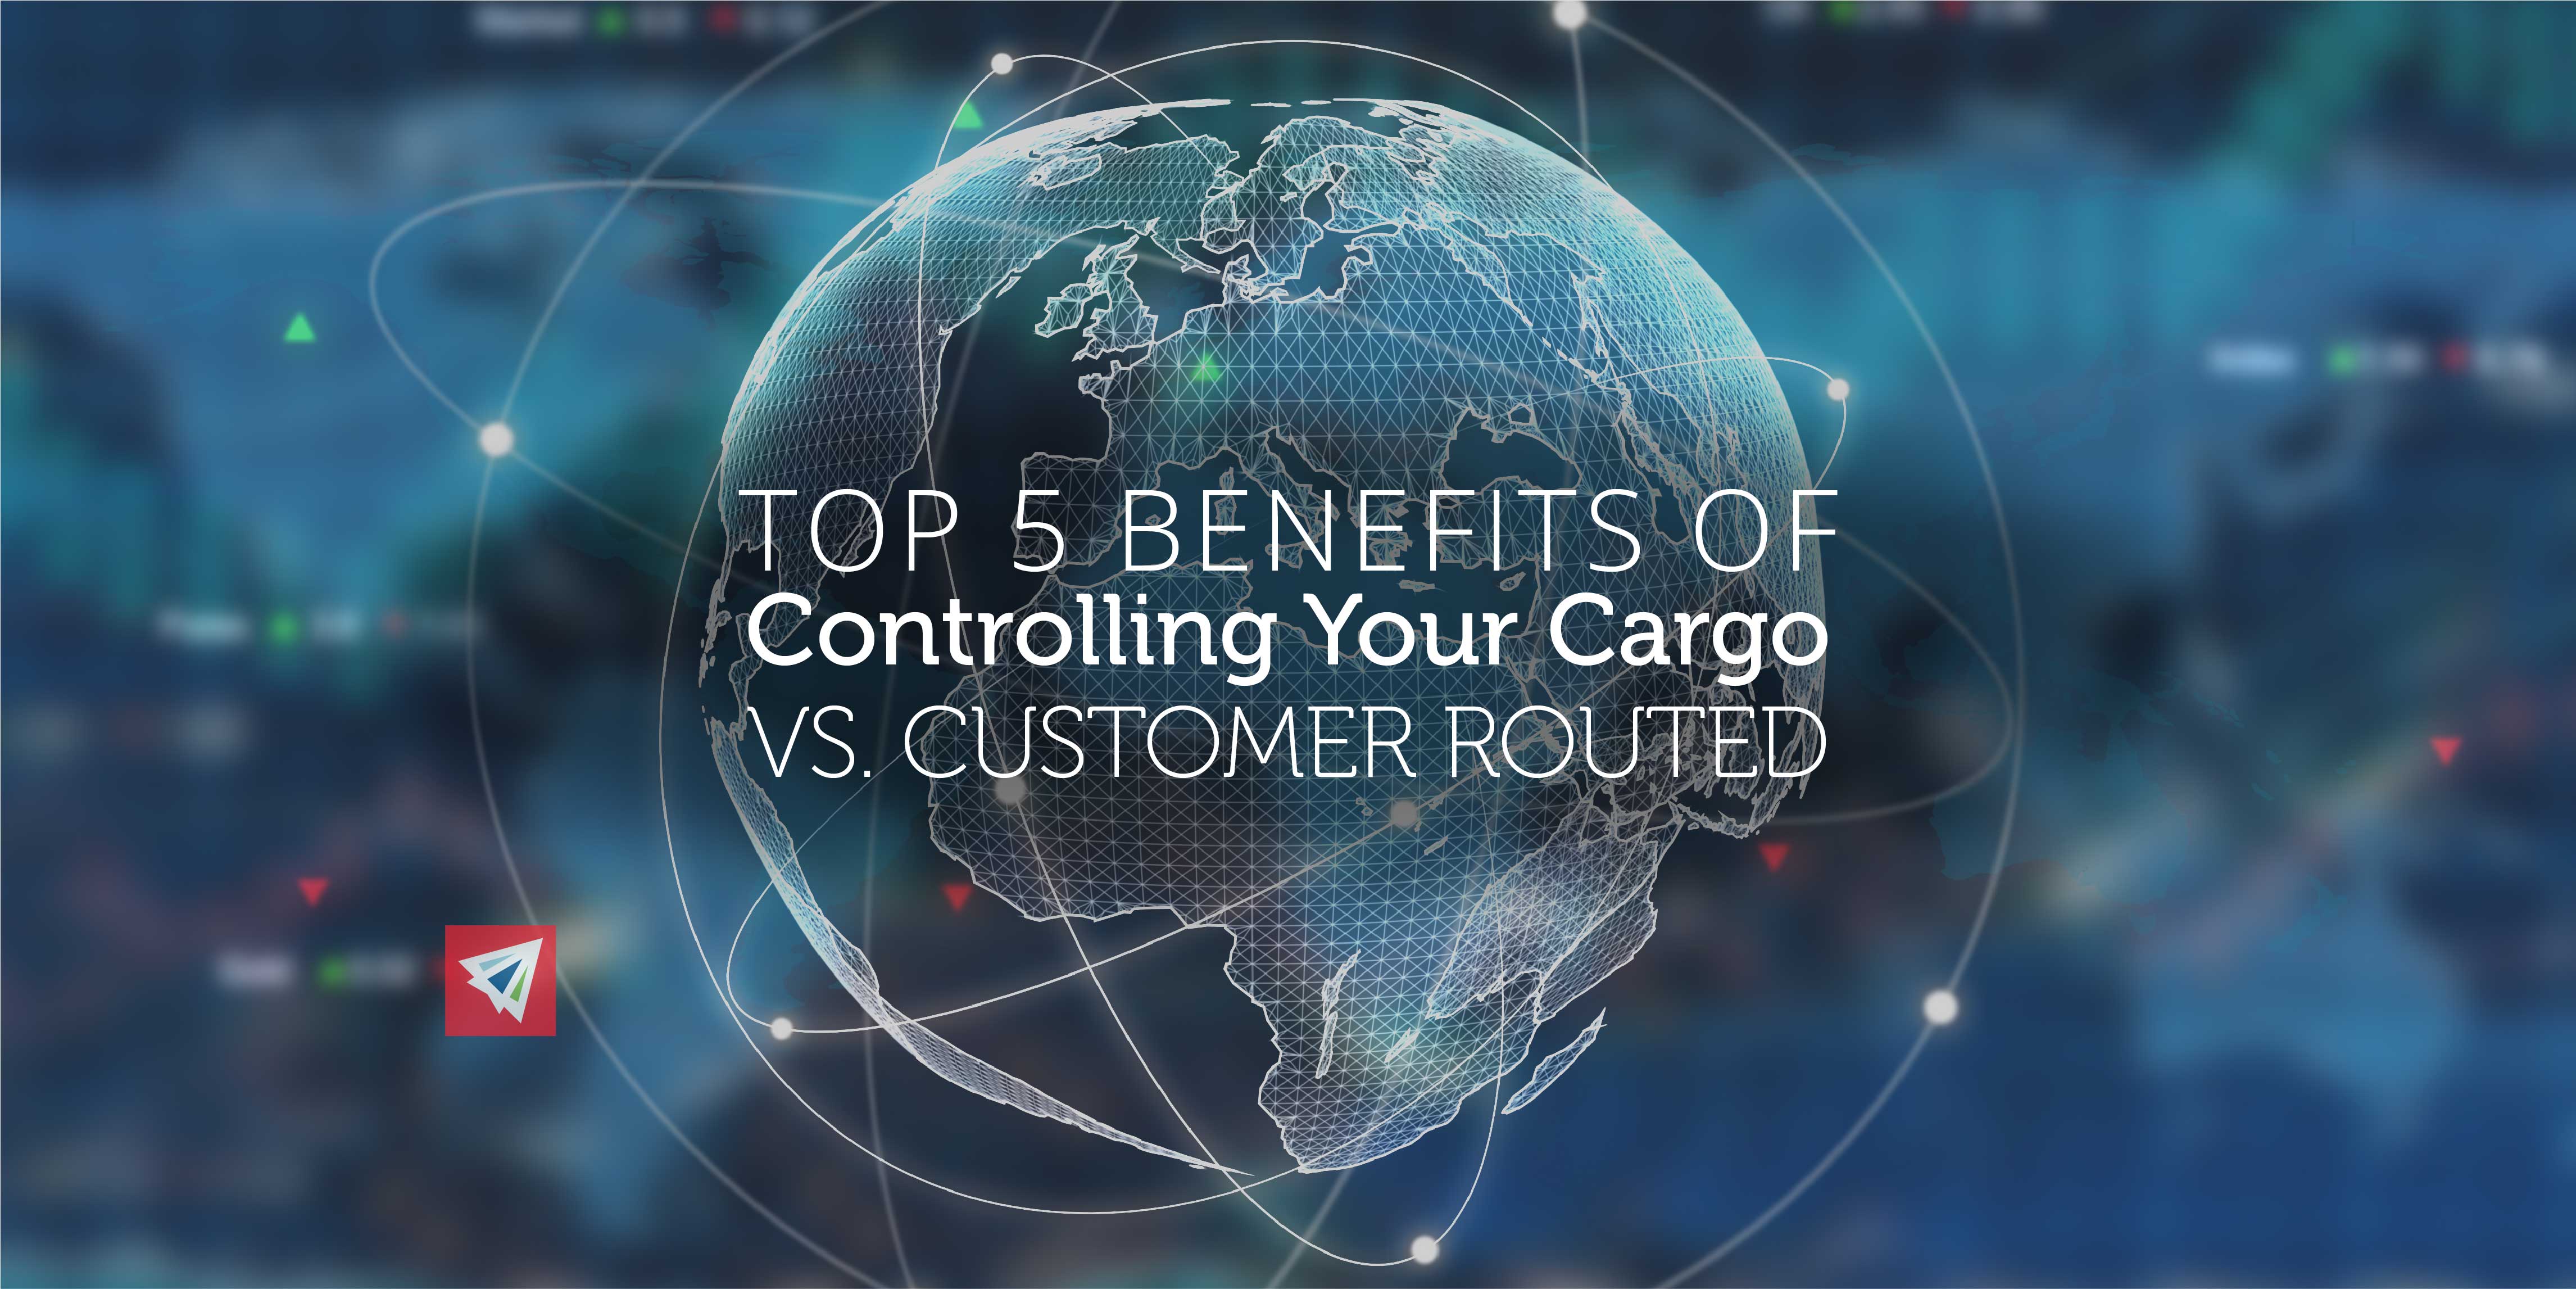 Top 5 Benefits of Controlling Your Cargo vs. Customer Routed Cargo